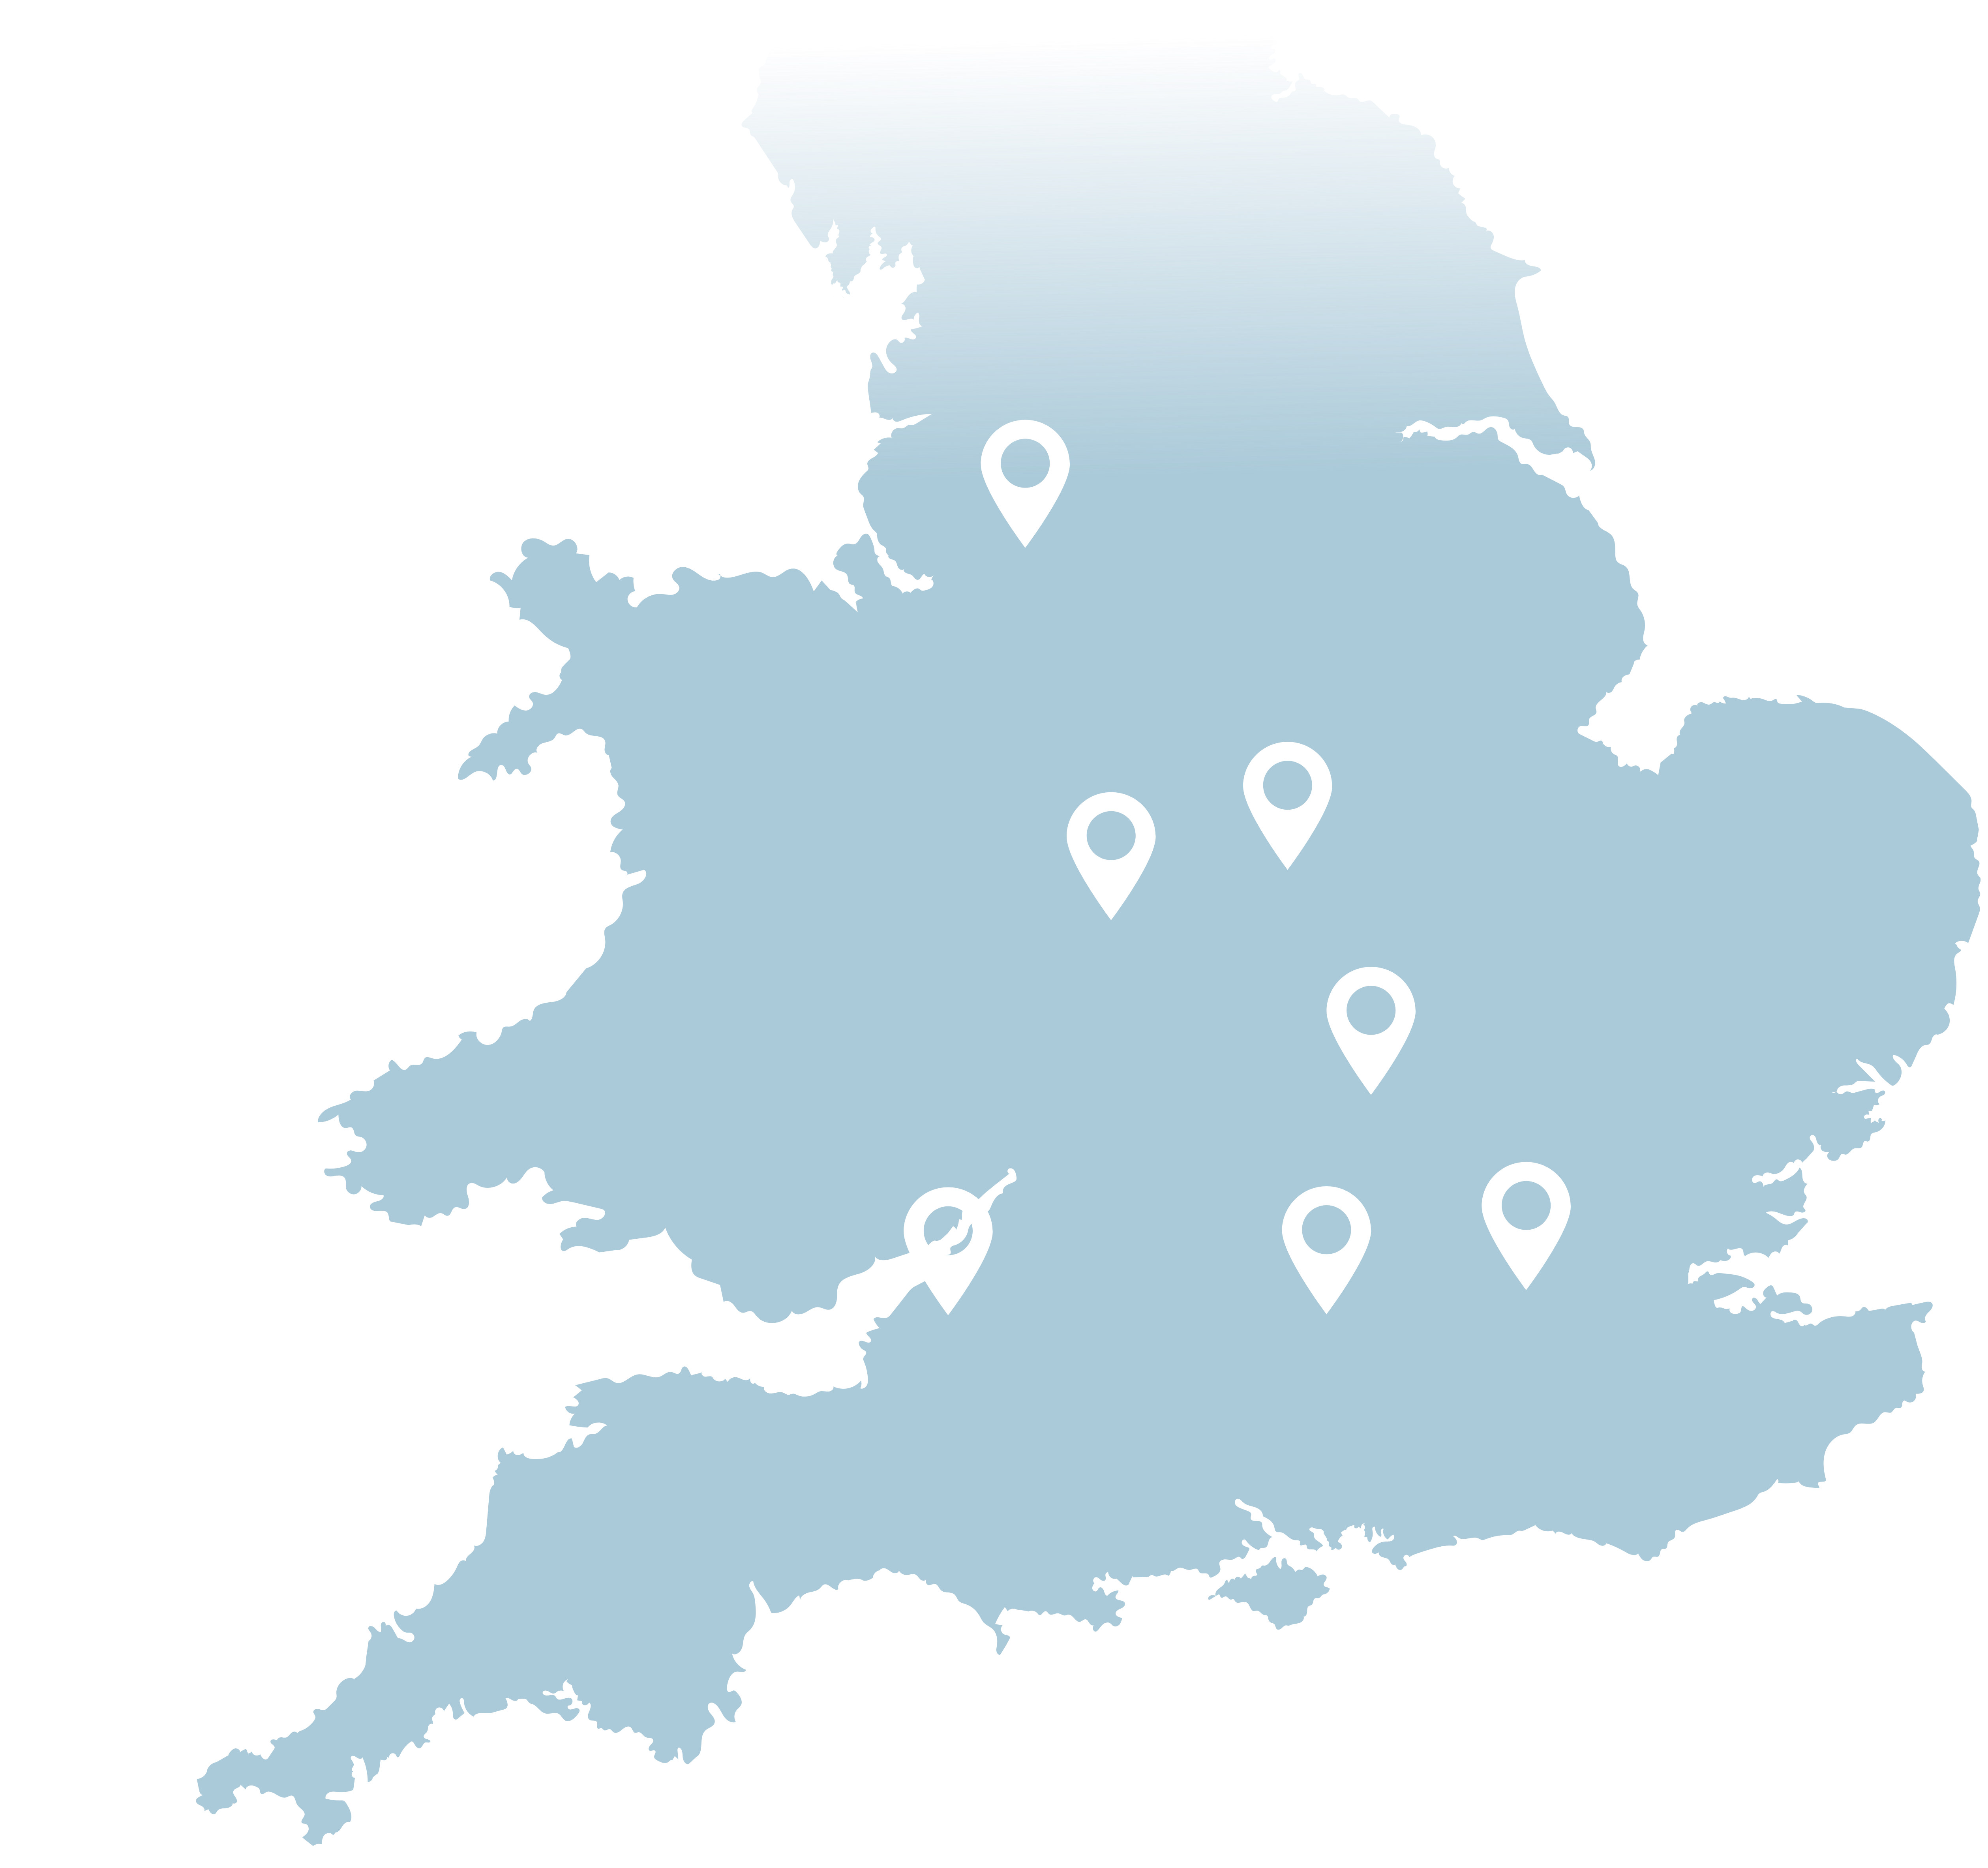 A stylised blue map of England, showcasing the locations of our offices and operating areas throughout the Midlands and South East, including Greater London